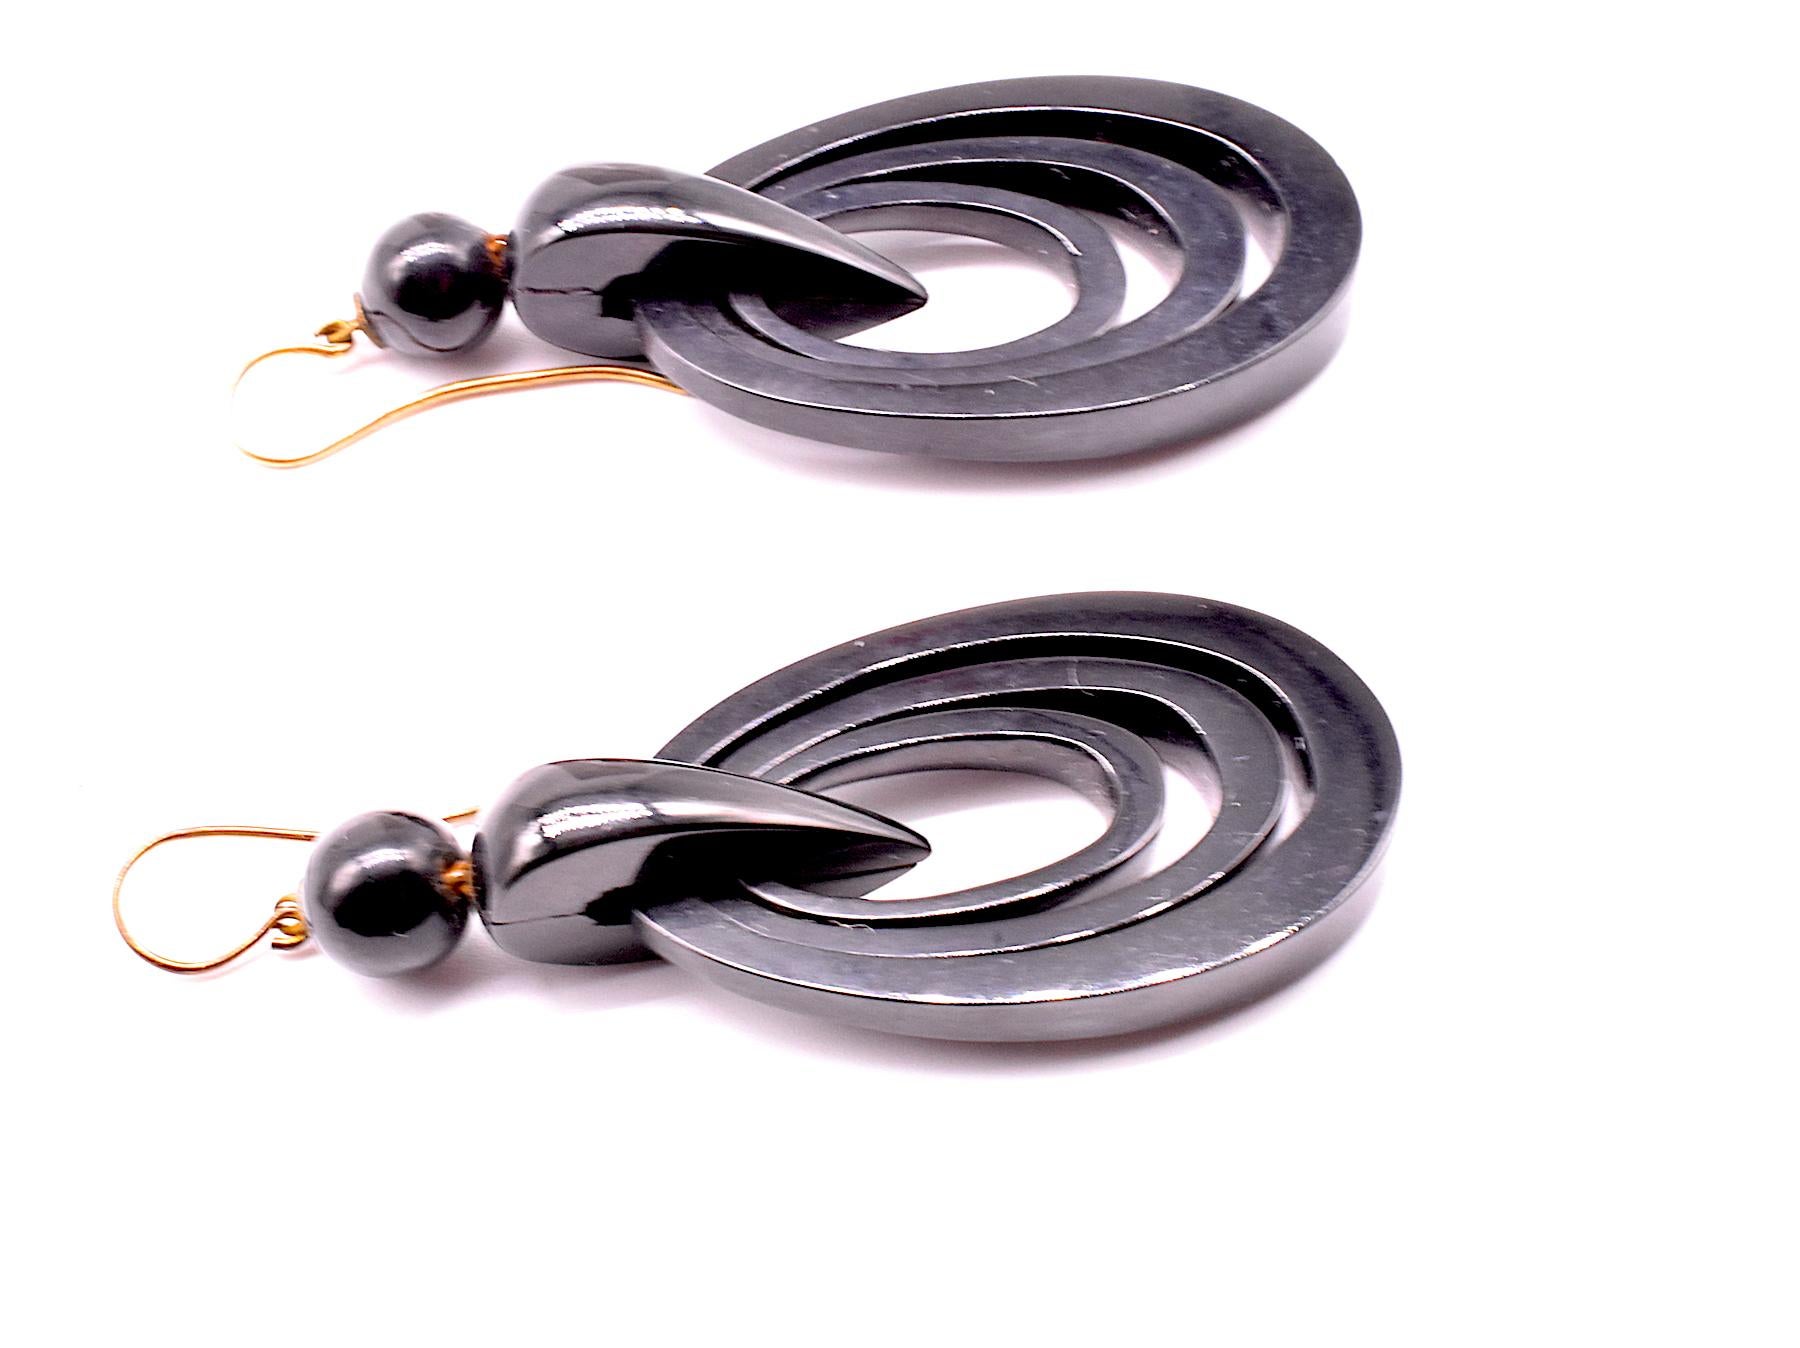 Wonderfully modern form geometric concentric circle earrings with three concentric circles inlaid within a larger circle. The earrings are mounted on shepherds hooks for uncomplicated administration and removal. While the earrings are almost 2.5